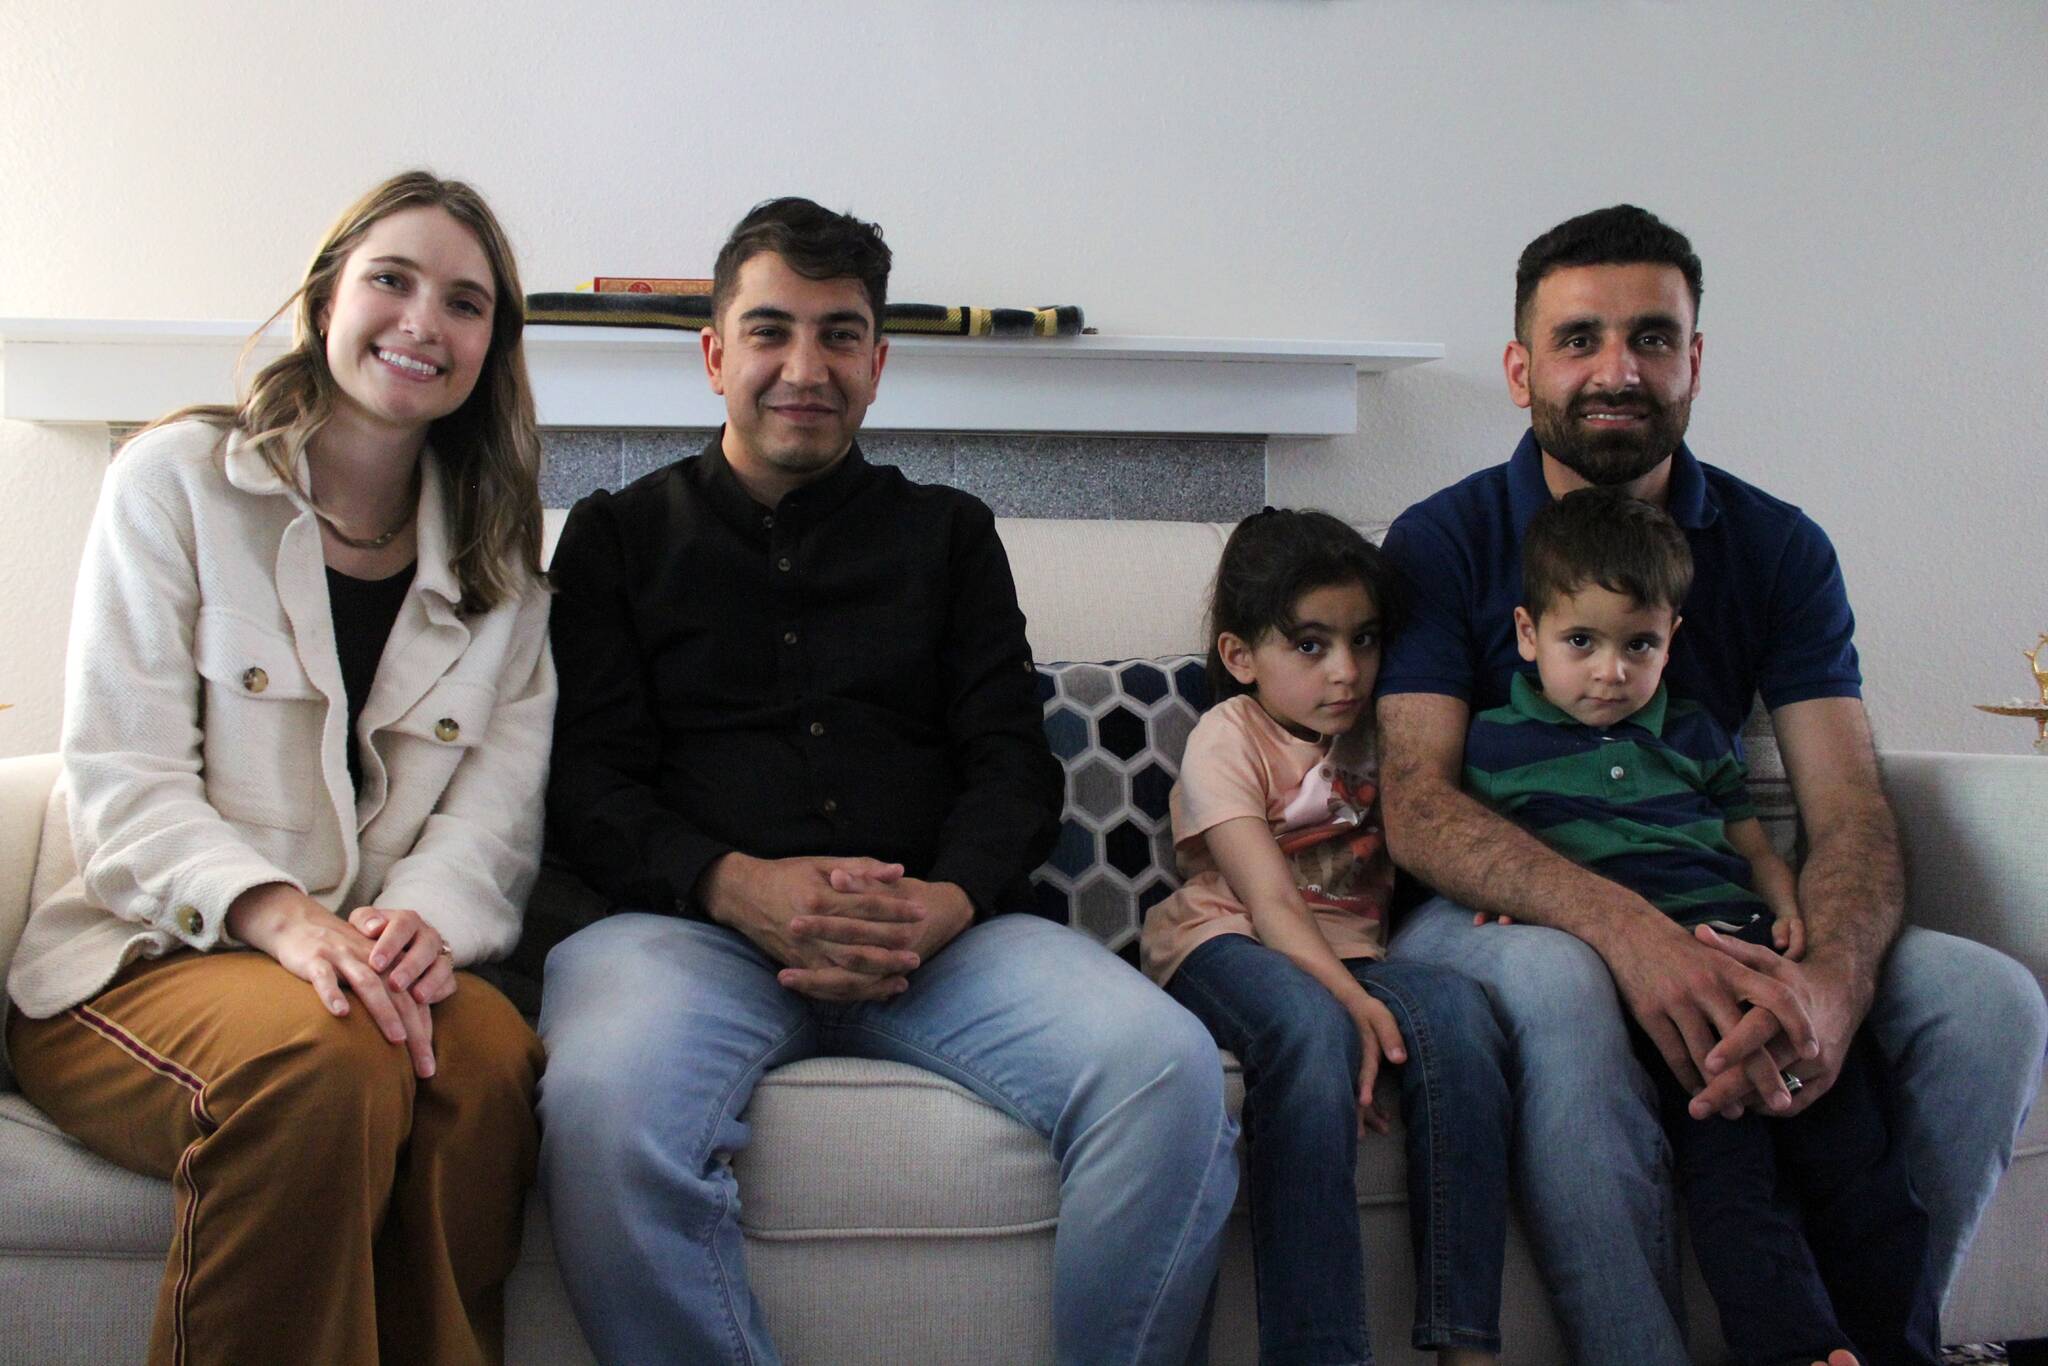 Left to right: Heather Brandt, program manager for refugee and immigrant services at Lutheran Community Services Northwest; Ghulamfarooq Noorzai, case manager for the Stanikzai family, and Hamid Stanikzai, along with two of his children, pose for a picture at his Federal Way area home. (Photo by Alex Bruell / The Mirror)